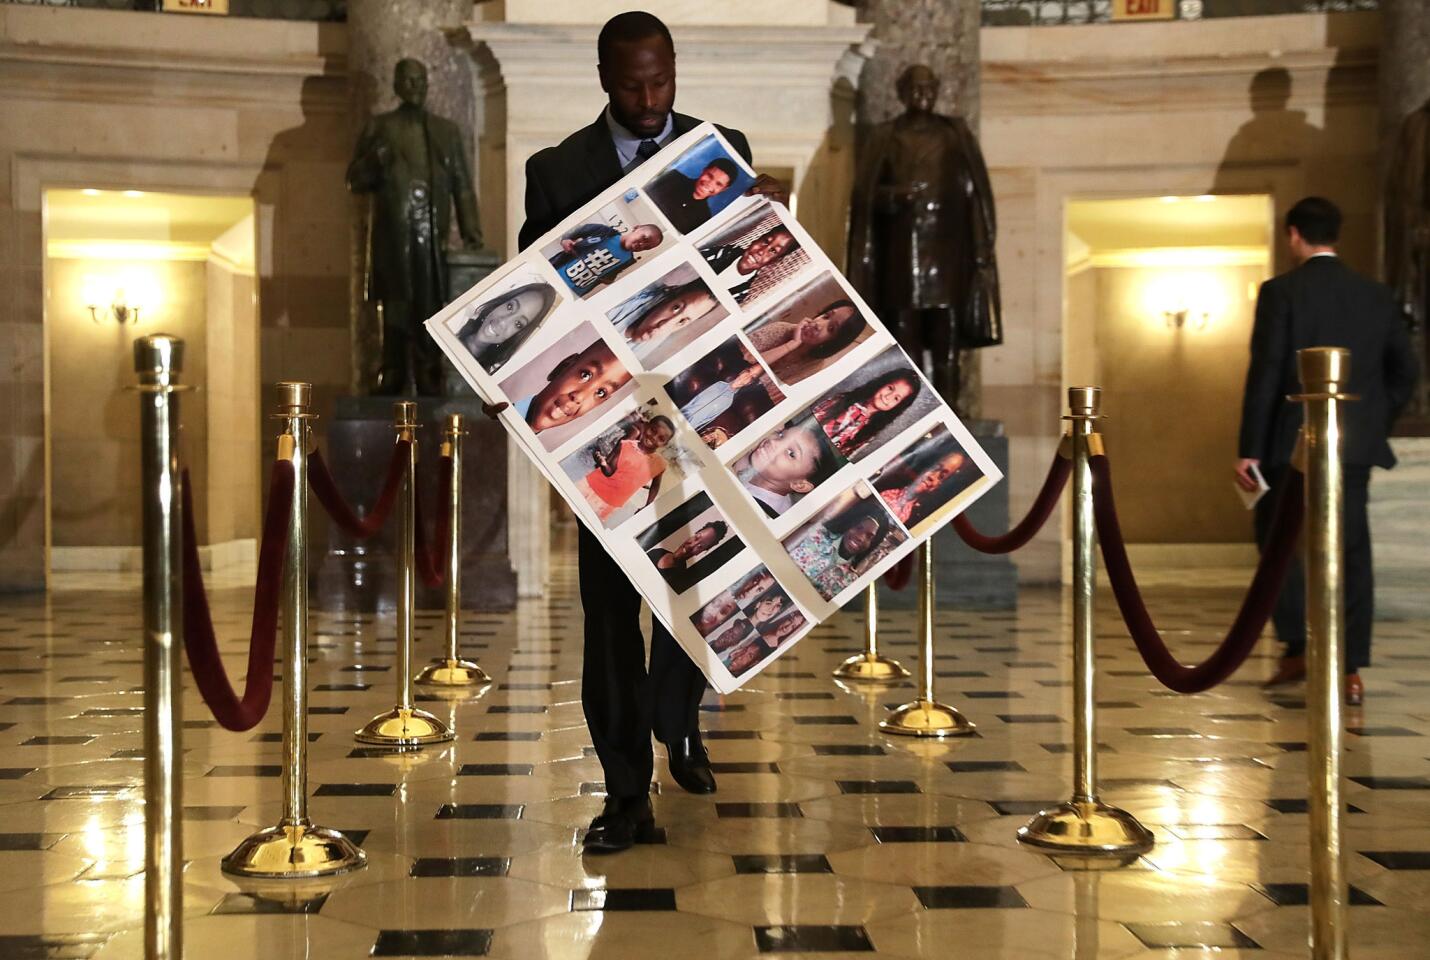 Charles Bolden, staff assistant of Rep. Robin Kelly (D-Ill.), holds a poster with pictures of gun violence victims from Chicago as he walks towards the House Chamber on June 22, 2016.